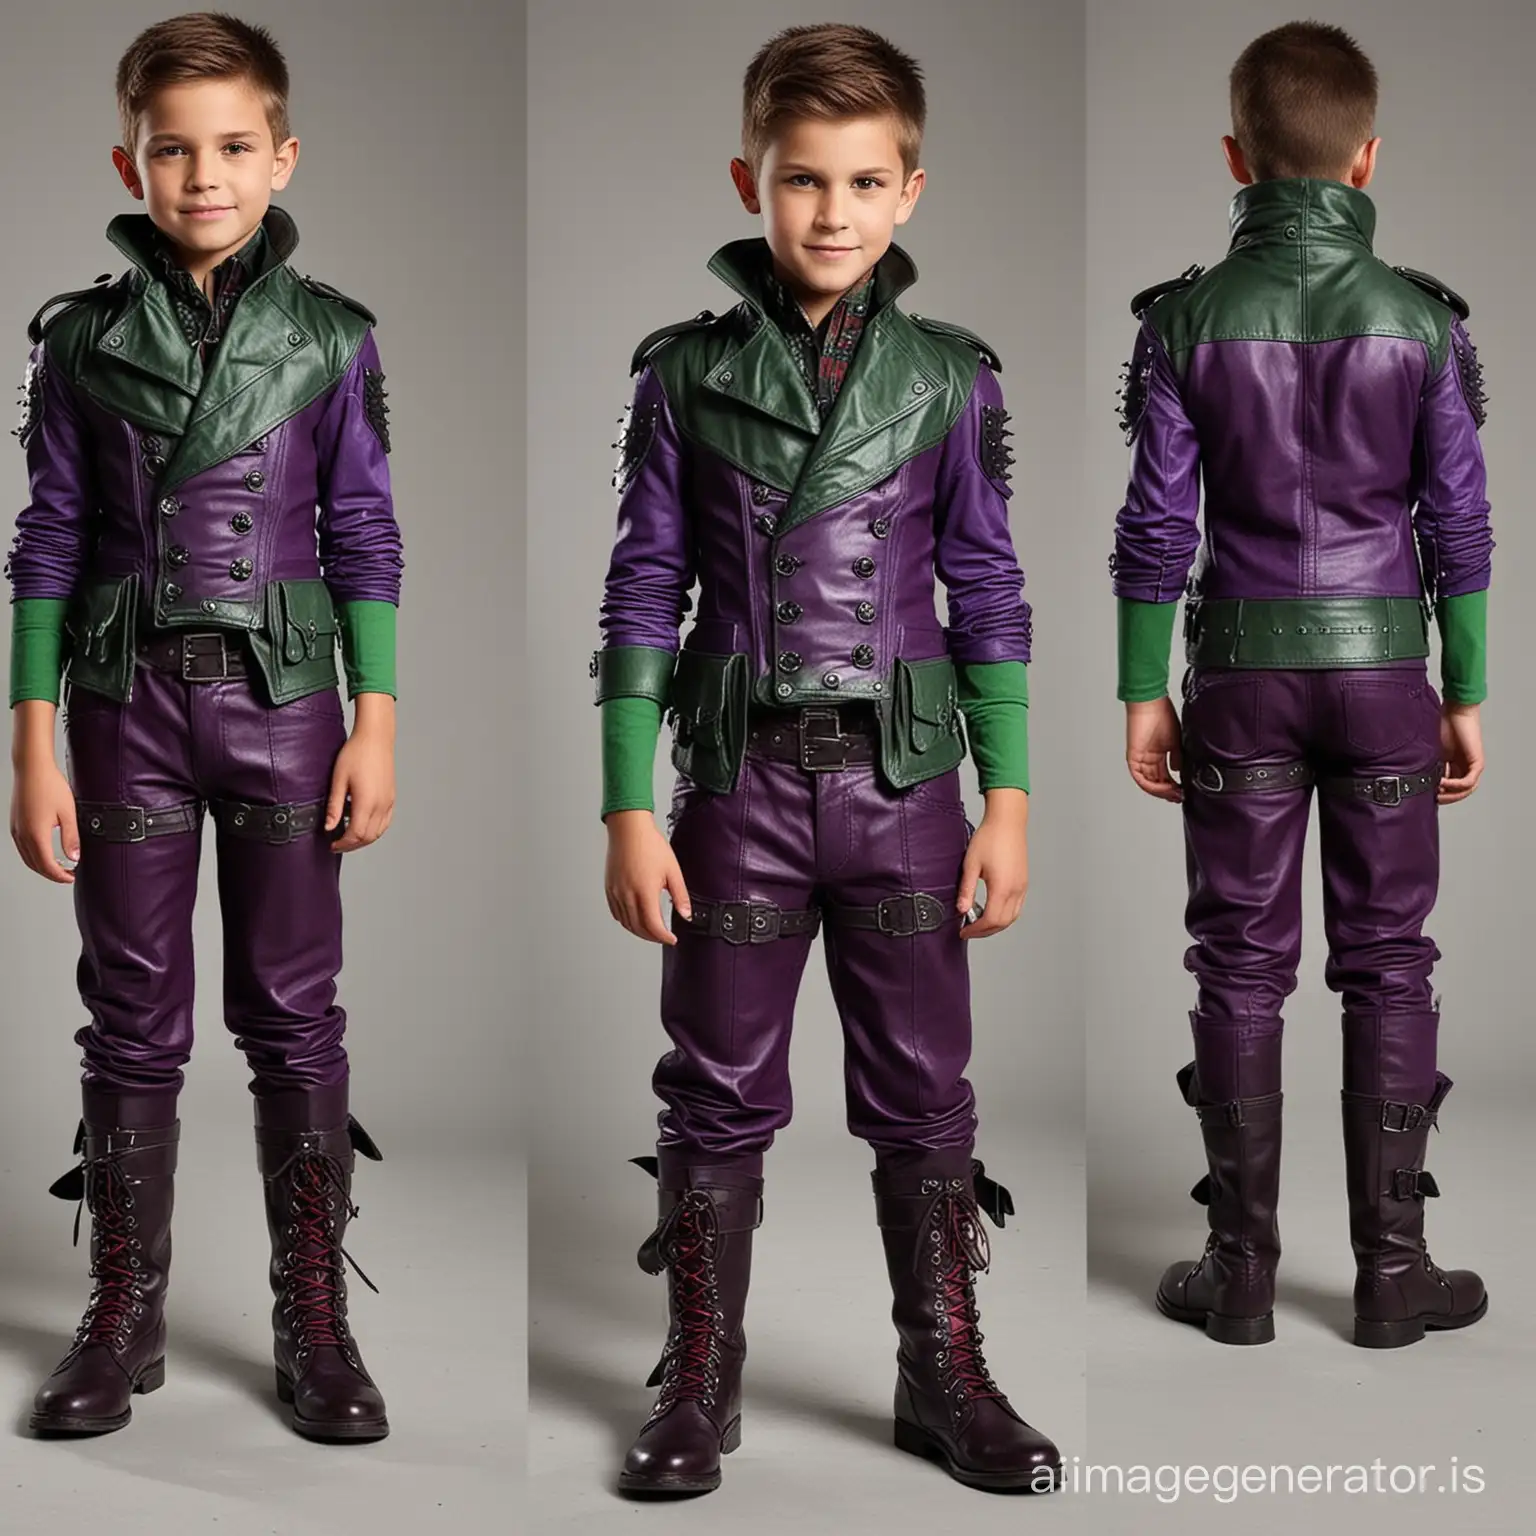 8YearOld-Boy-Villain-in-Intimidating-Purple-Leather-Outfit-with-Red-and-Green-Accents